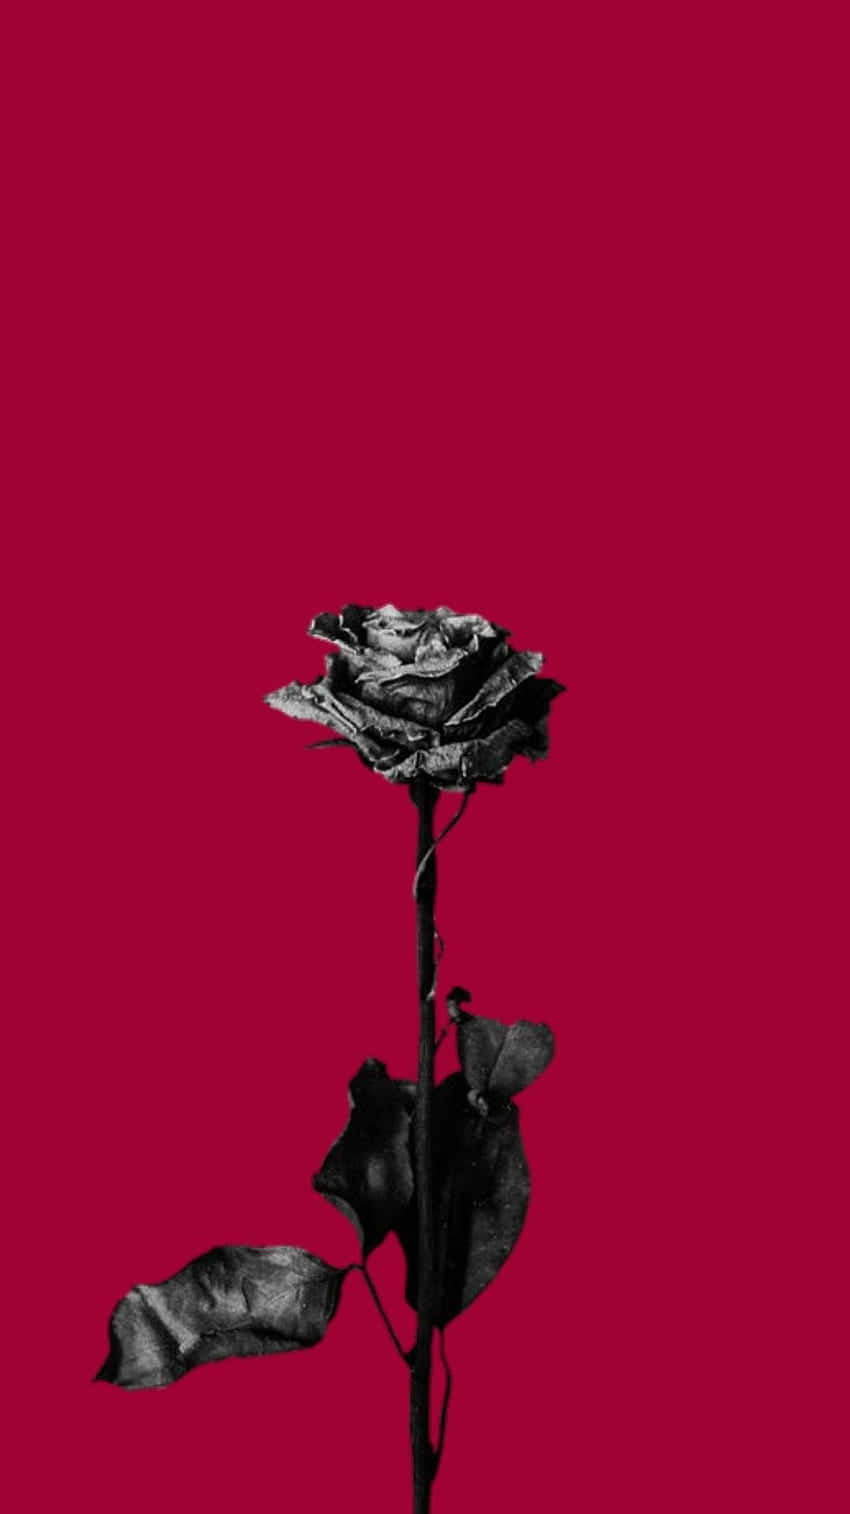 A Black Rose On A Red Background Wallpaper